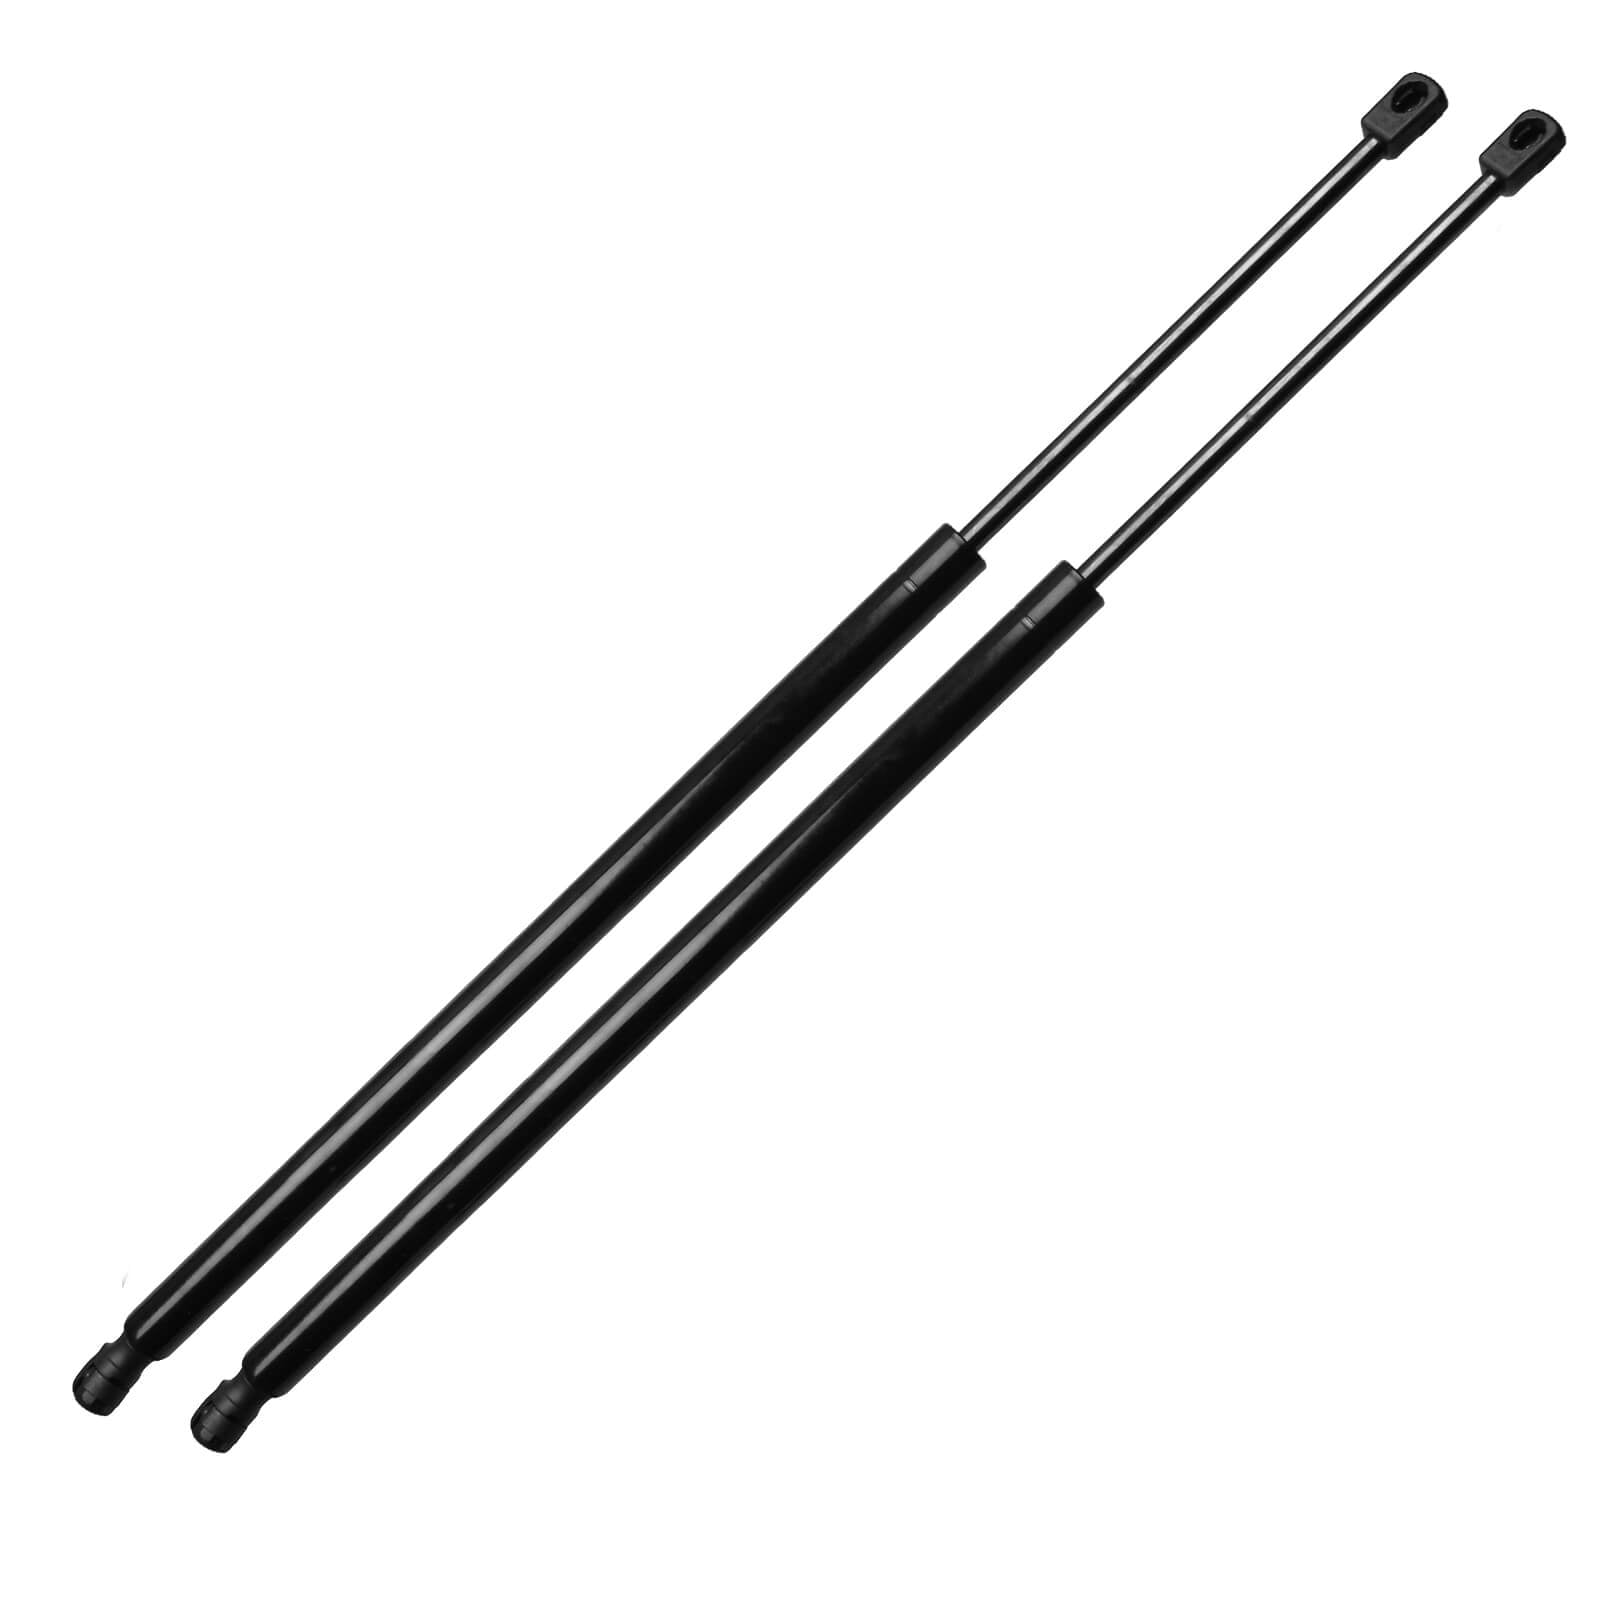 1999-2007 Ford F-250 Ford F-350 Ford F-450 Ford F-550 Super Duty Hood SG304029 F81Z16C826AB BOXI 2pcs Hood Lift Supports Fit 2000-2005 Ford Excursion 